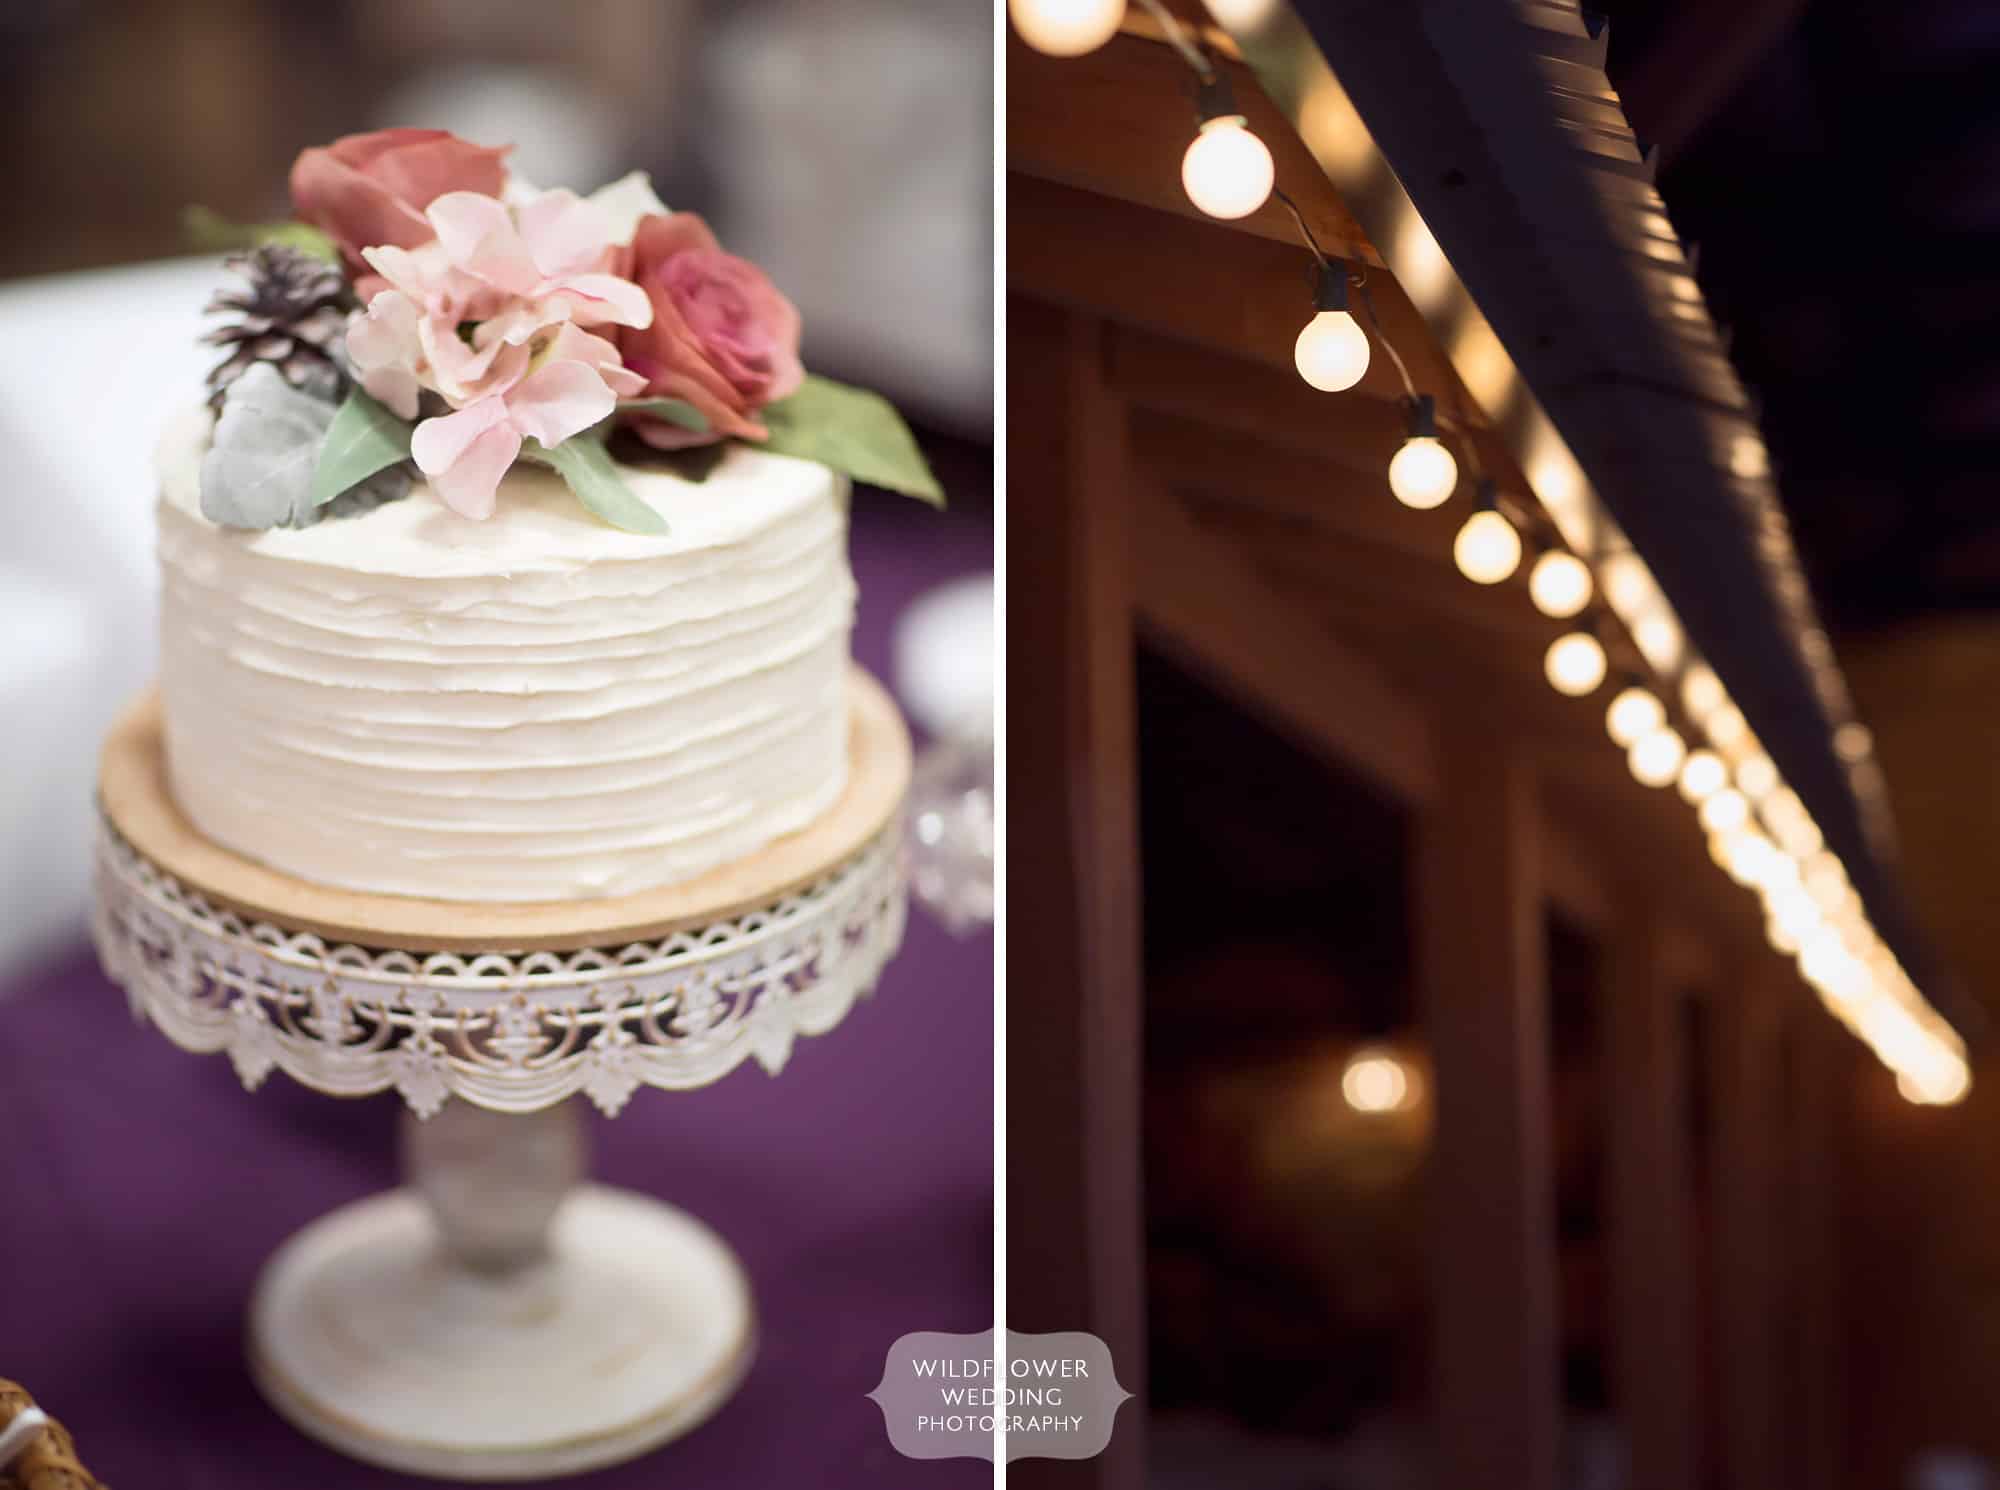 Beautiful and simple white wedding cake from Sugar and Spice Laura's Delights Bakery in Hermann, MO.